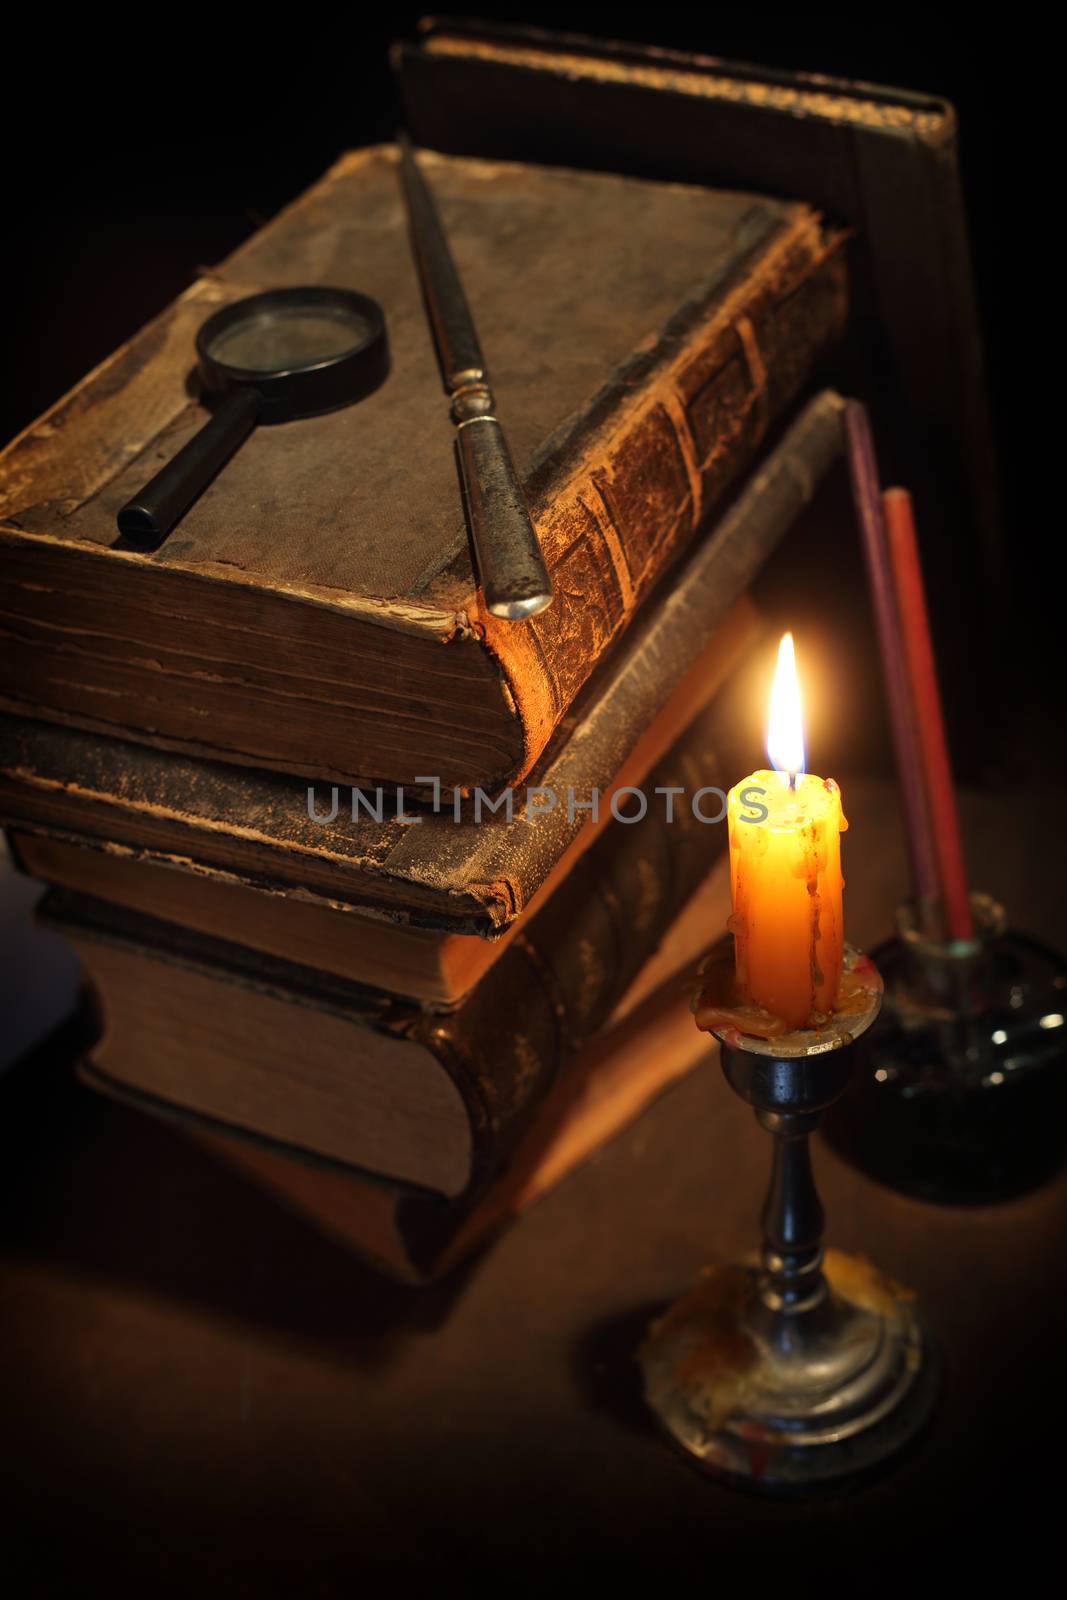 Pile of the old books and a candle